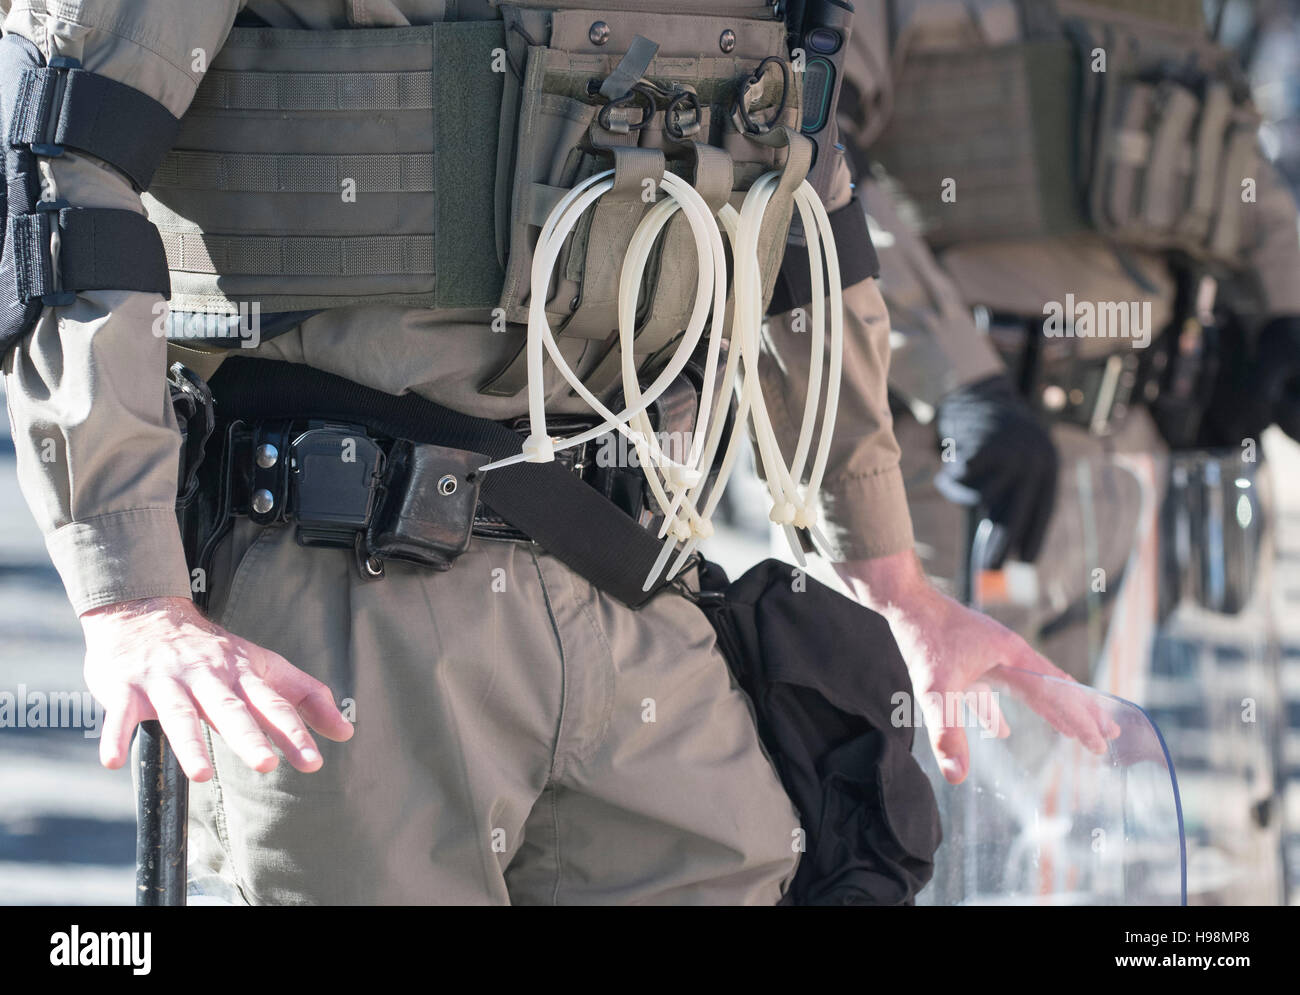 Texas state trooper's riot gear includes plastic 'Flex Cuf' restraints instead of traditional metal handcuffs Stock Photo